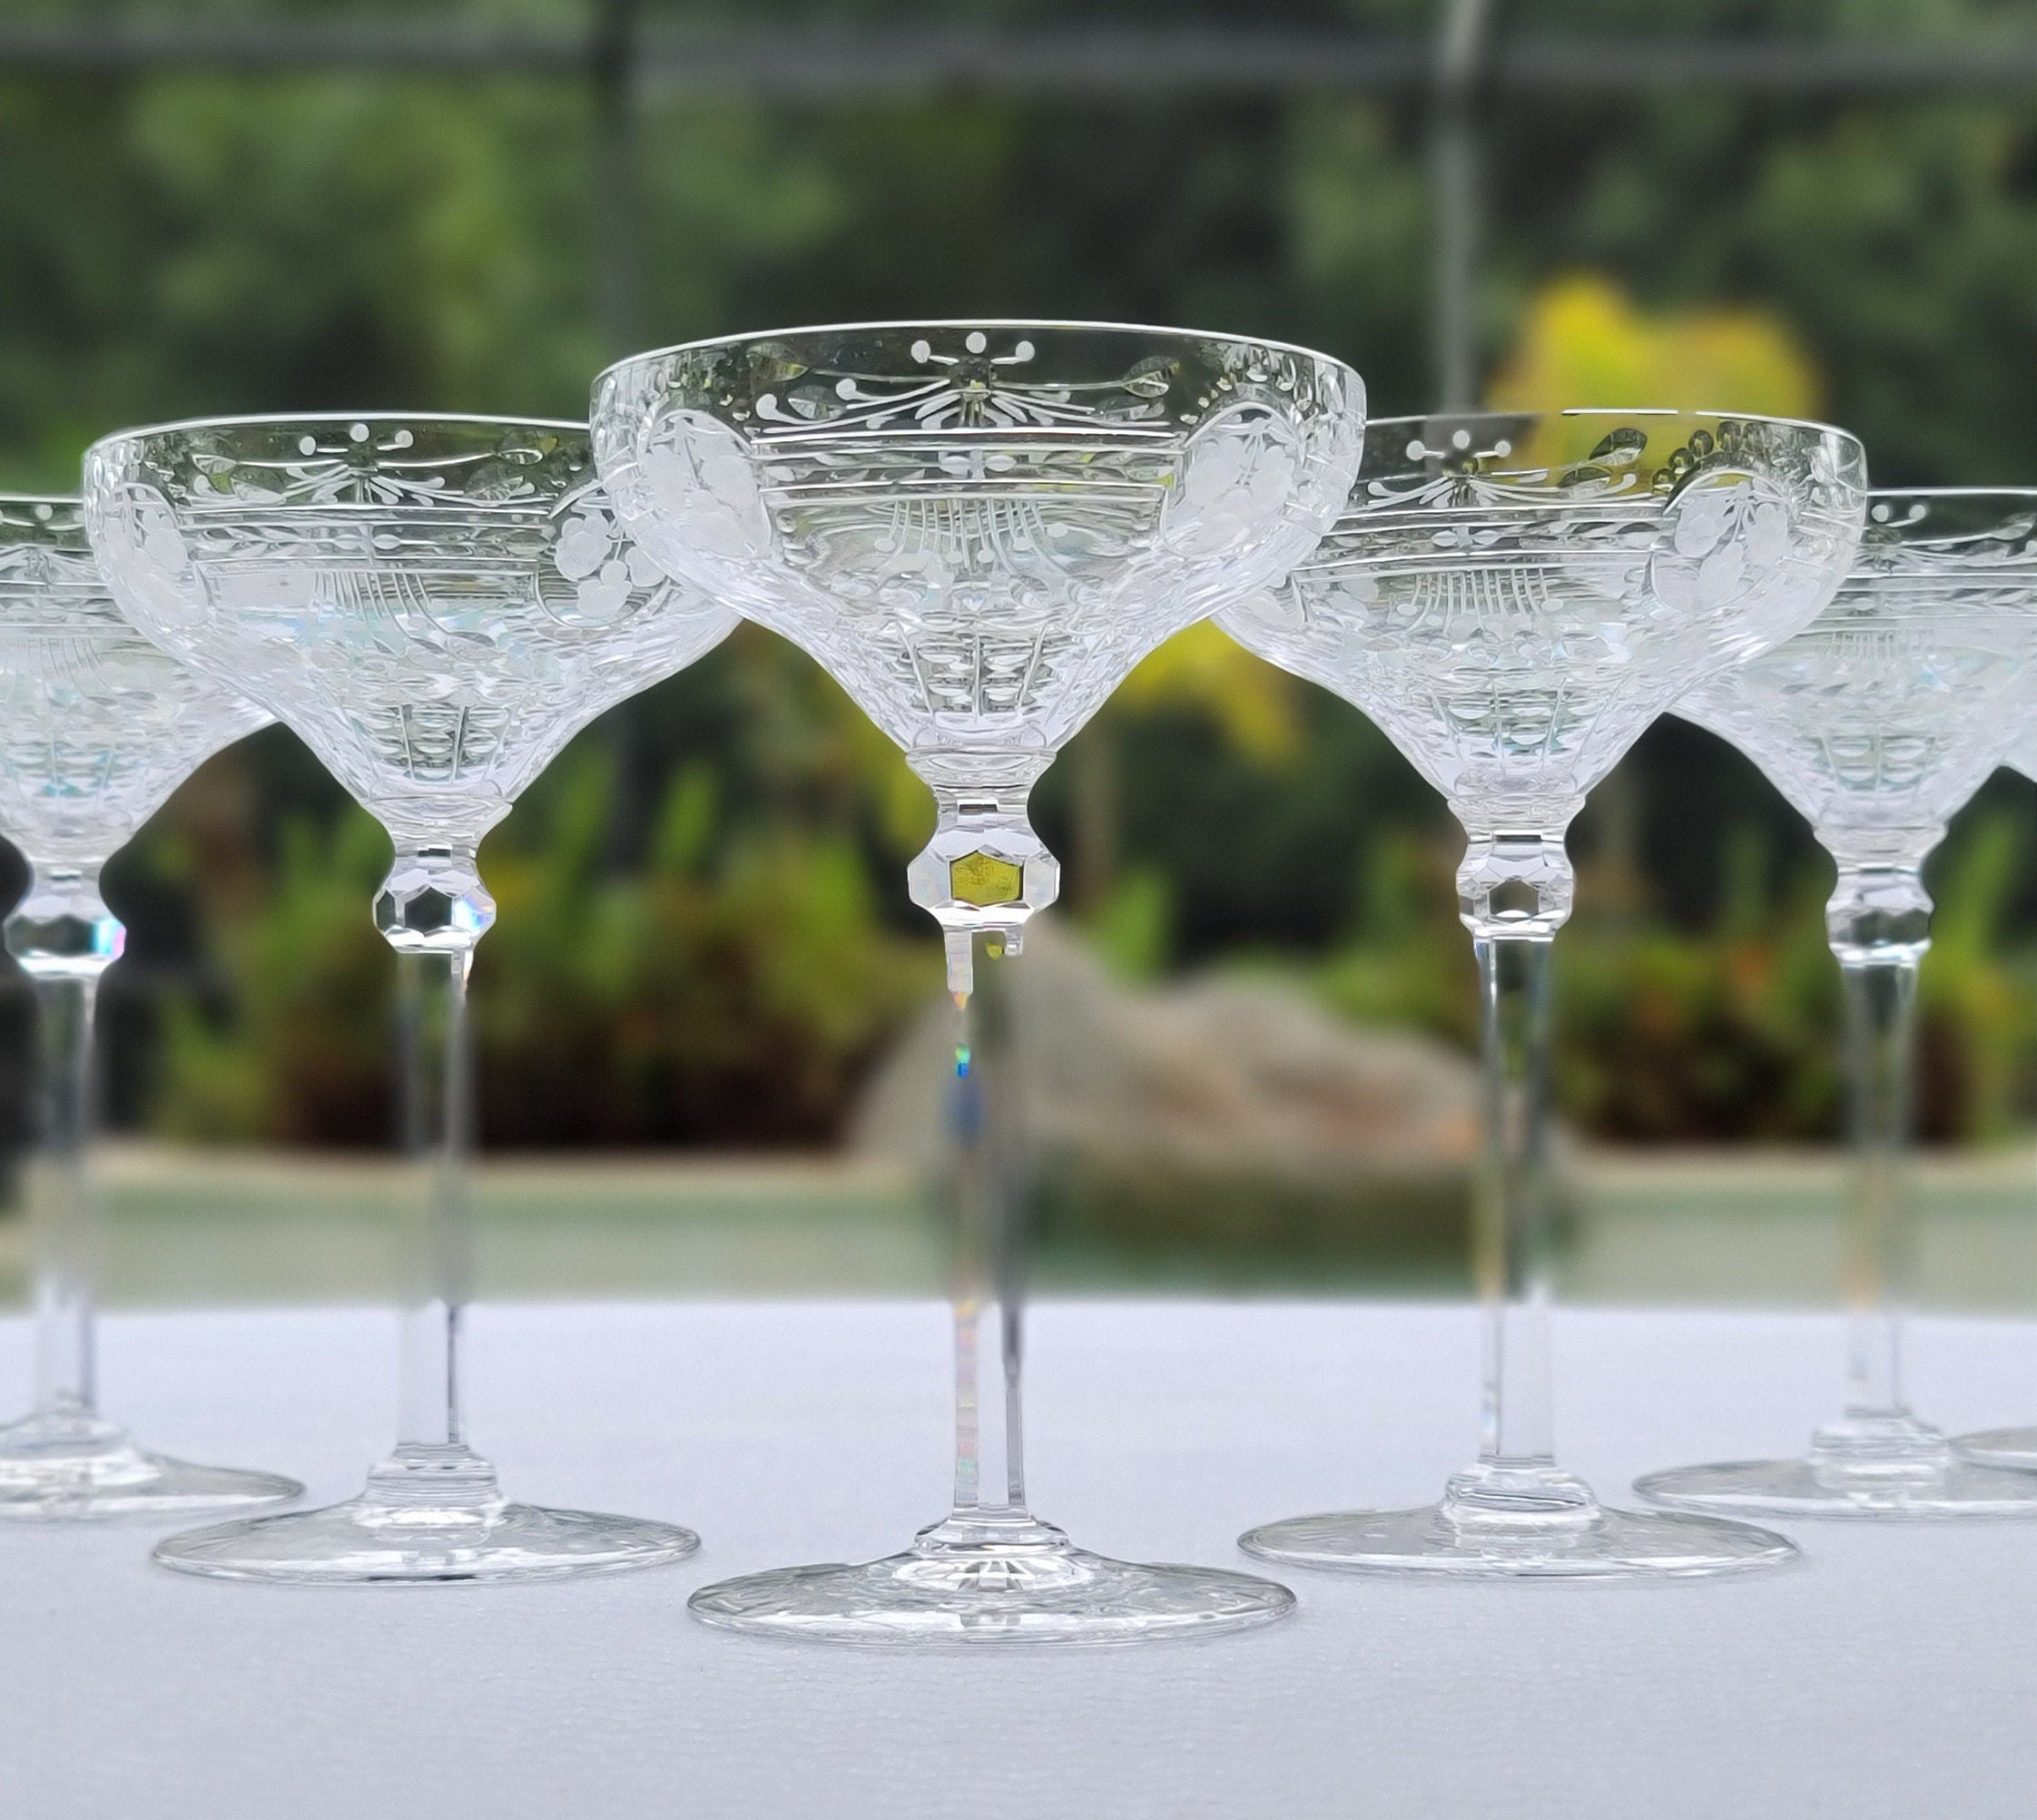 Set of 4 Cut Crystal-style Coupe Champagne Tower Glasses New Years Eve  Holiday Celebration or Romantic Wedding Decor Table Scape Drinkware 